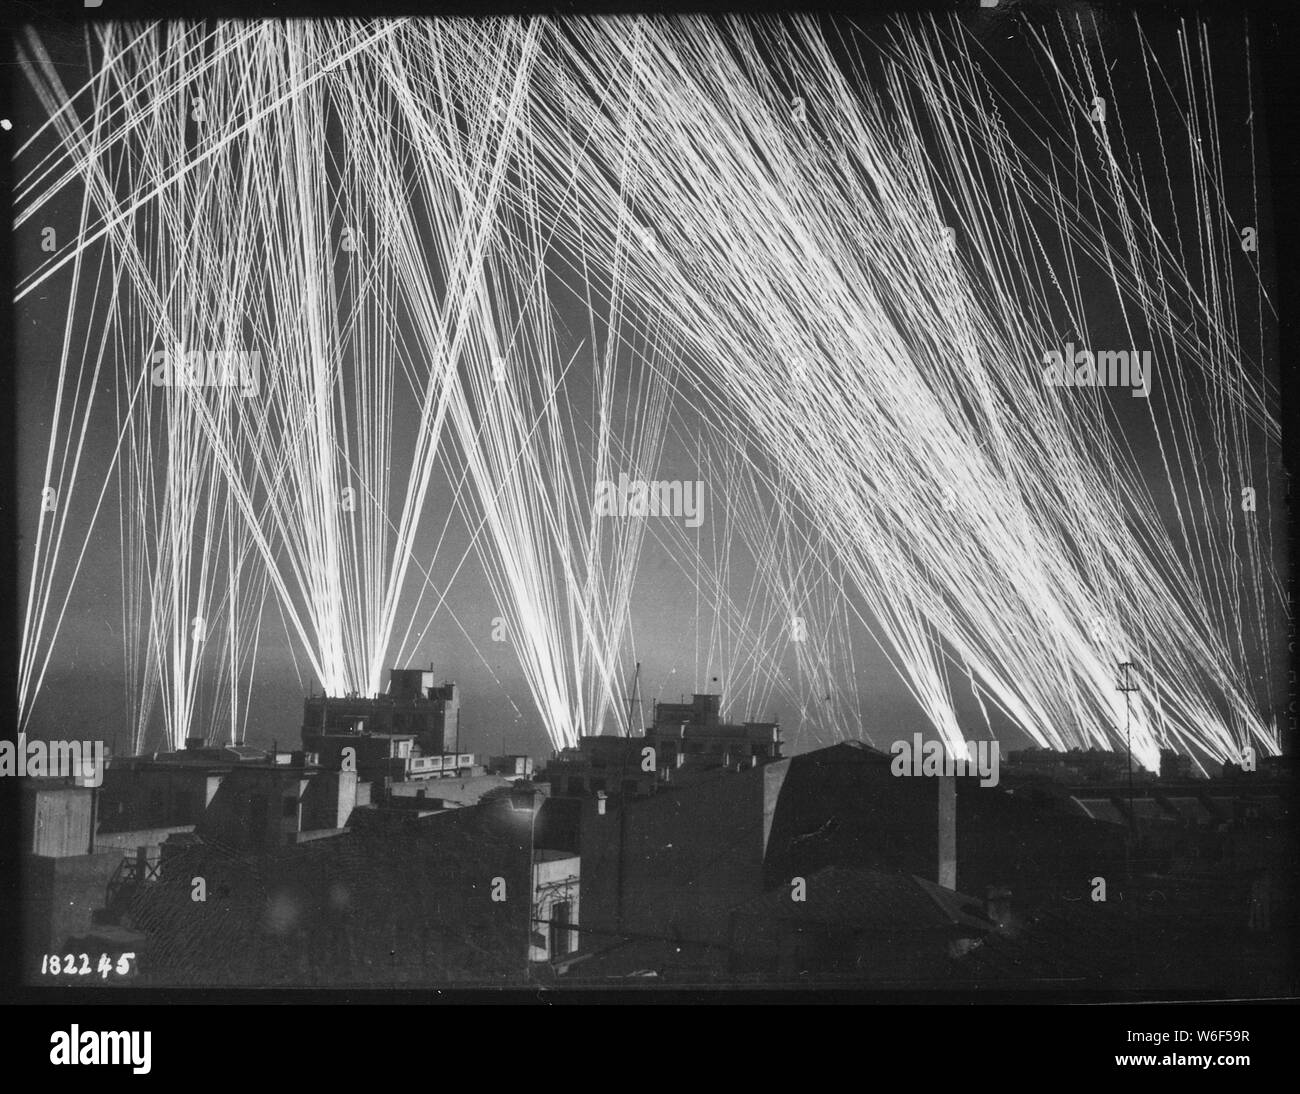 Ack-Ack fire during an air raid on Algiers, by the Nazis.; General notes:  Use War and Conflict Number 1018 when ordering a reproduction or requesting information about this image. Stock Photo